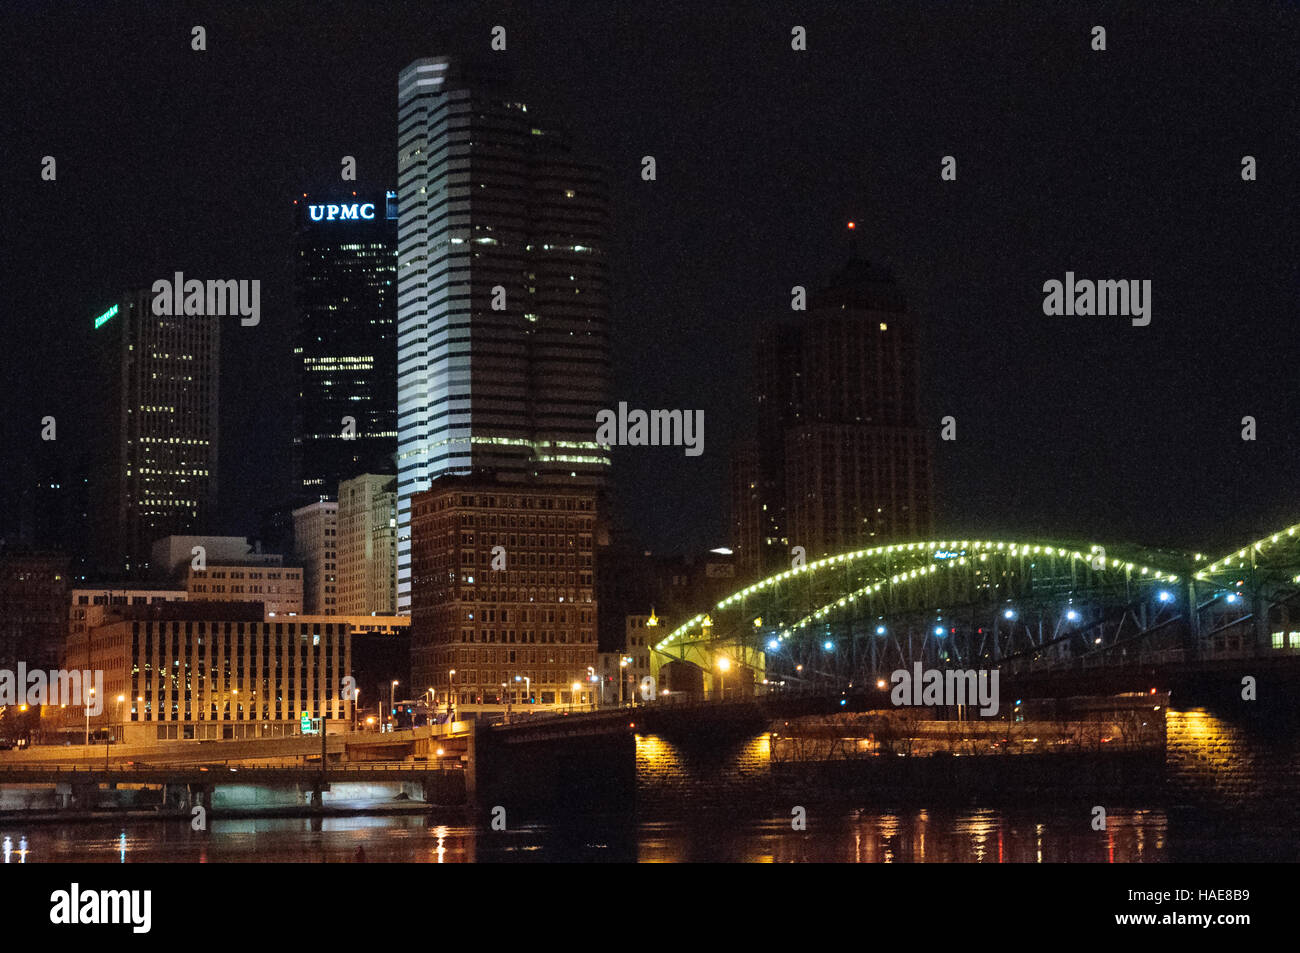 Allegheny River Burgh Central Business District Stockfoto